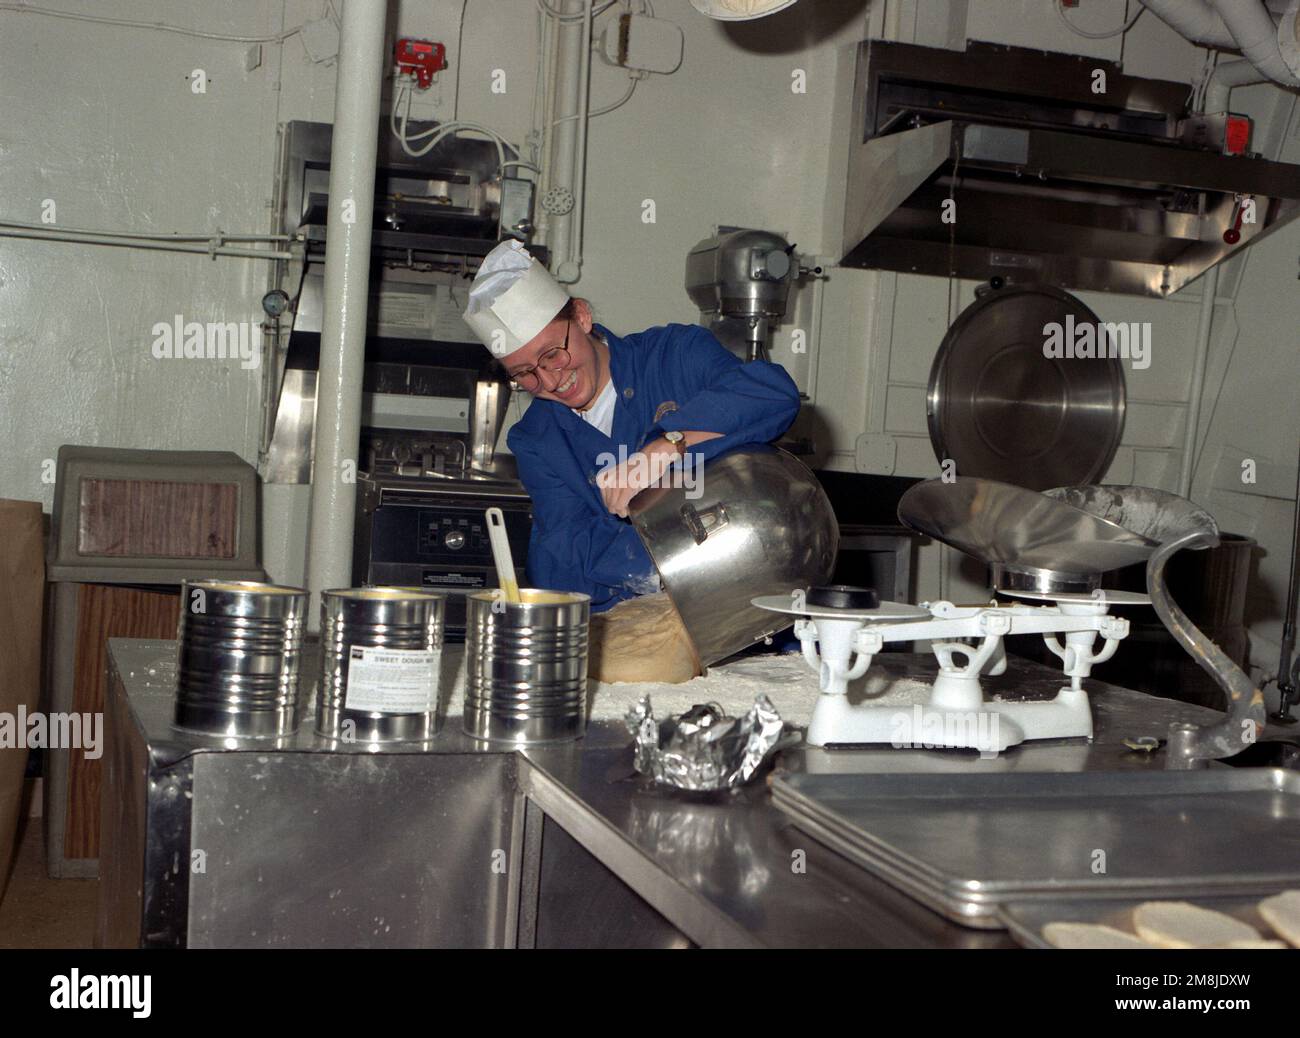 Mess SPECIALIST SEAMAN (MSSN) Erika Wood works in the bakery on board the submarine tender USS HOLLAND (AS-32) preparing bread. Country: Pacific Ocean (POC) Stock Photo